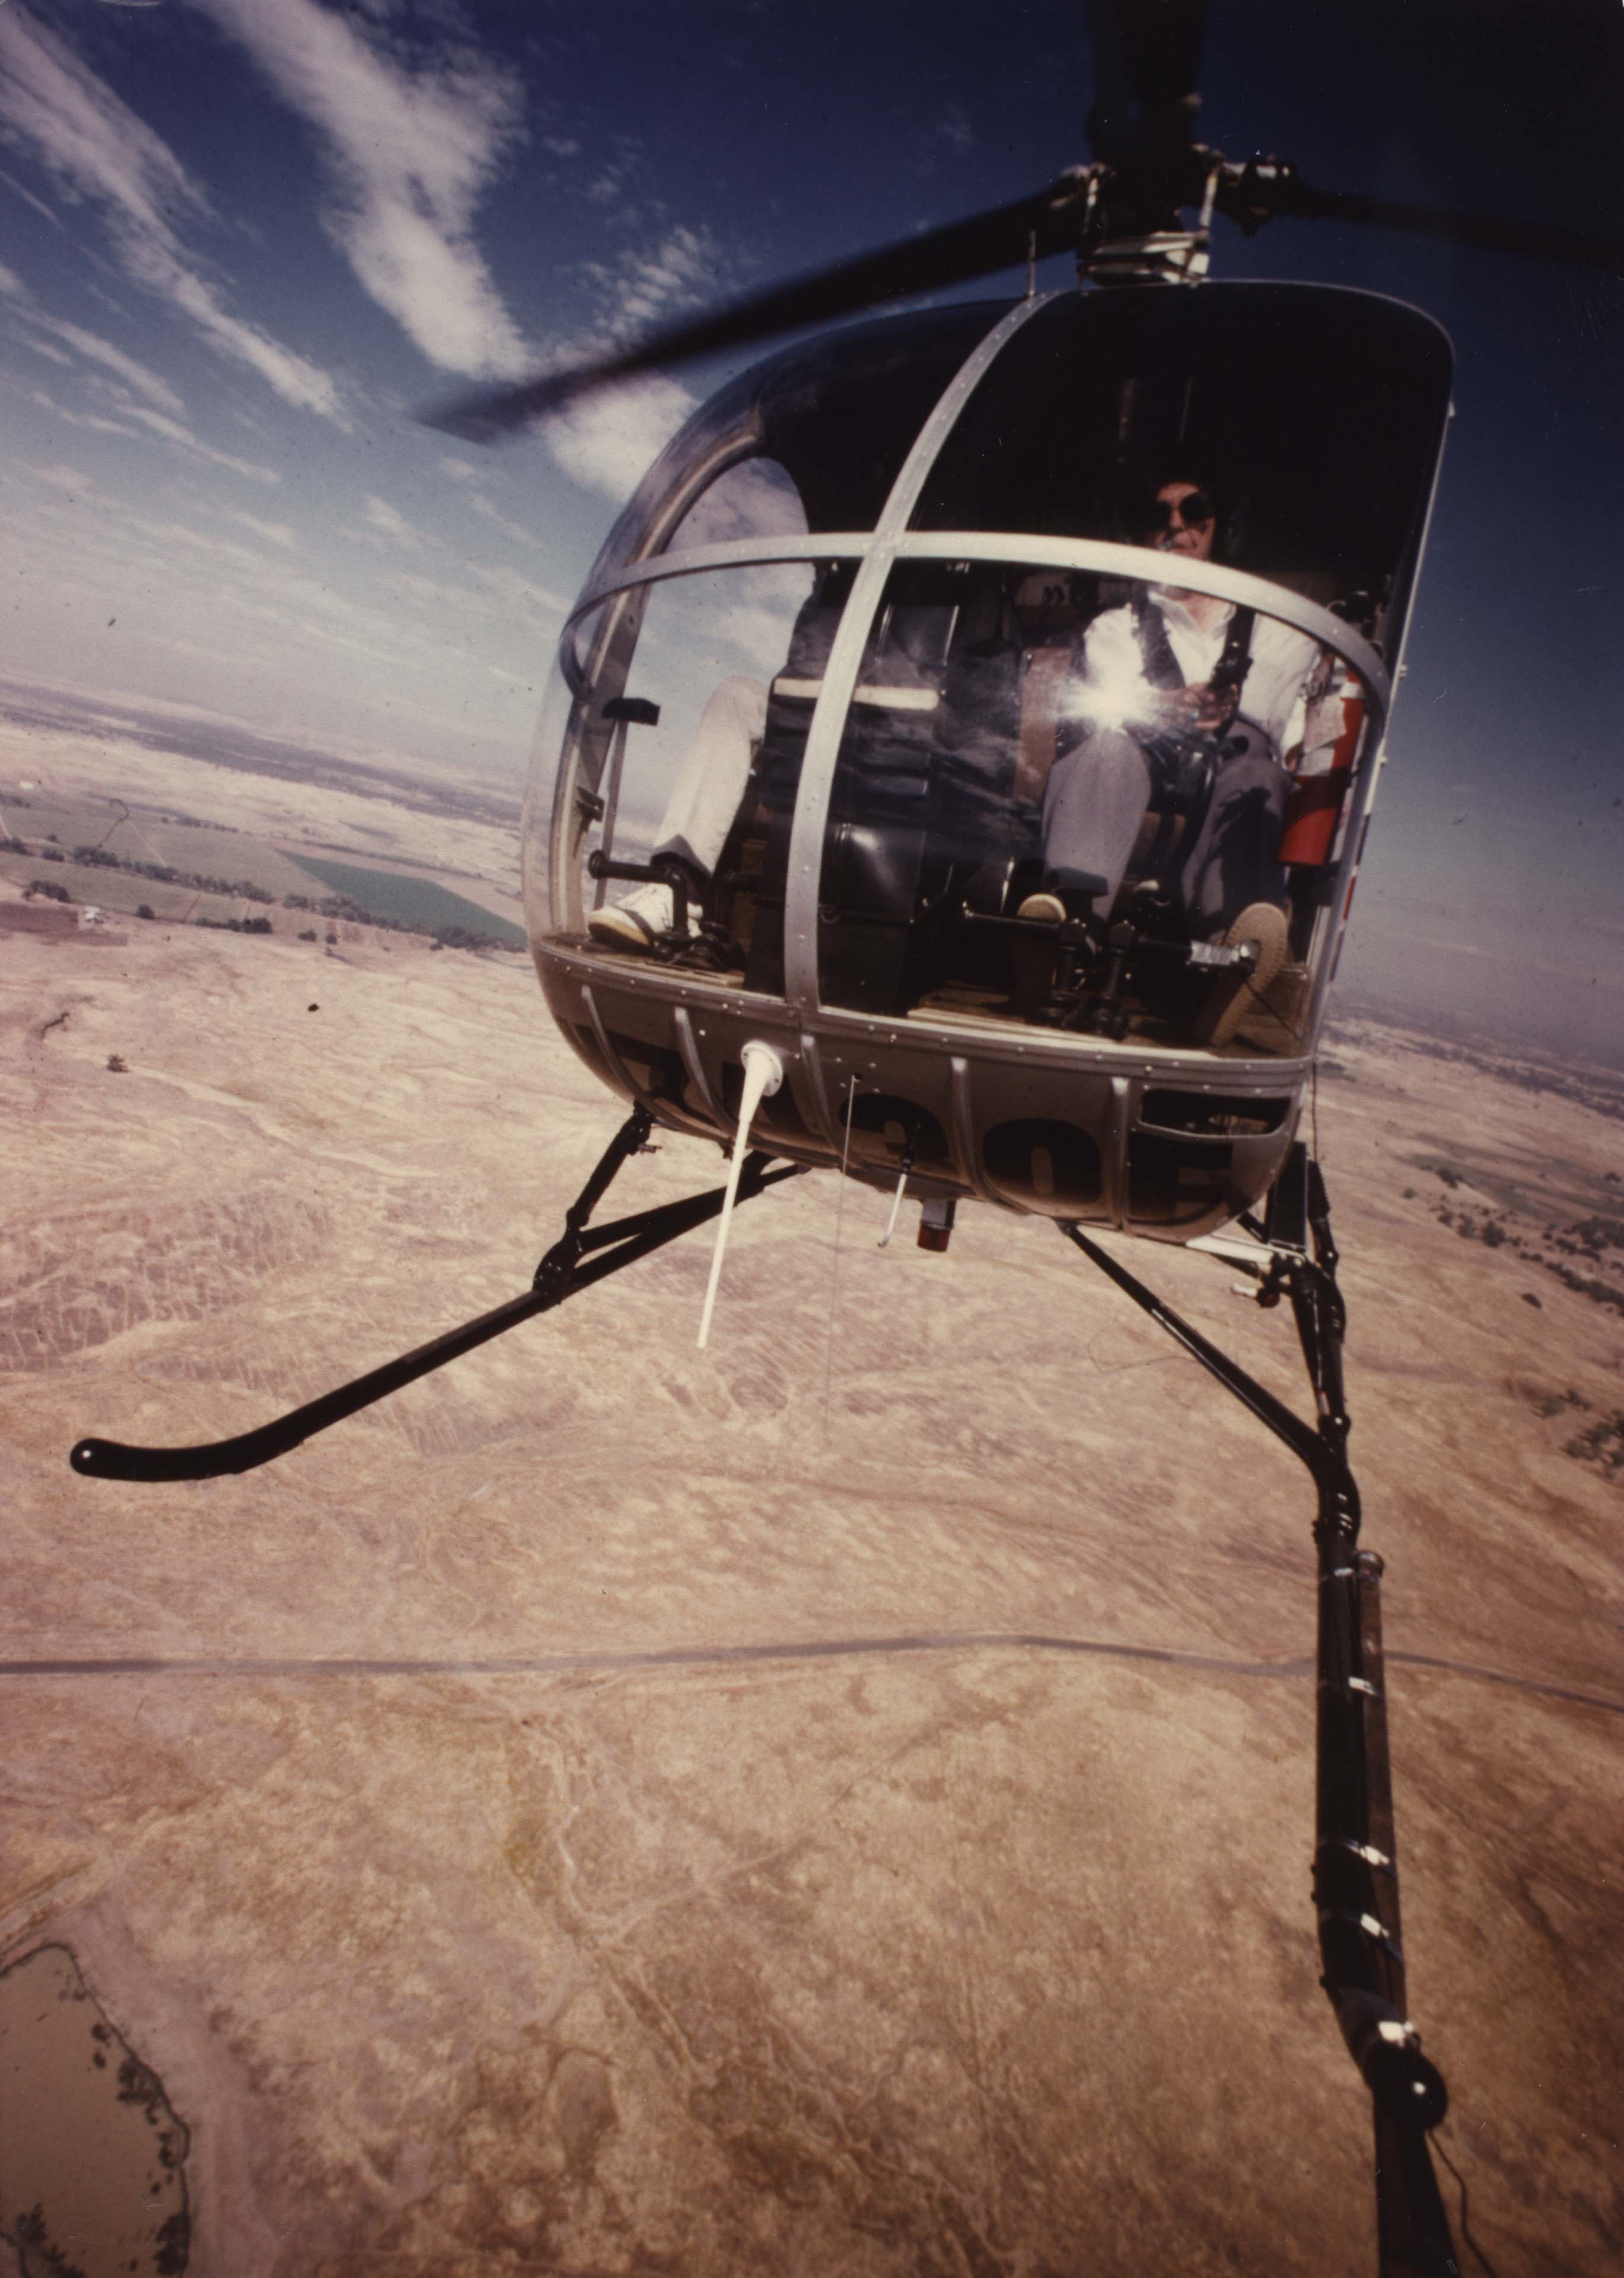 Doris Lockness (WG #55) in a Hughes 300. This photo is a self-portrait taken from a camera attached to the helicopter skid. Courtesy of the TWU Libraries Woman's Collection, Texas Woman's University, Denton, TX.